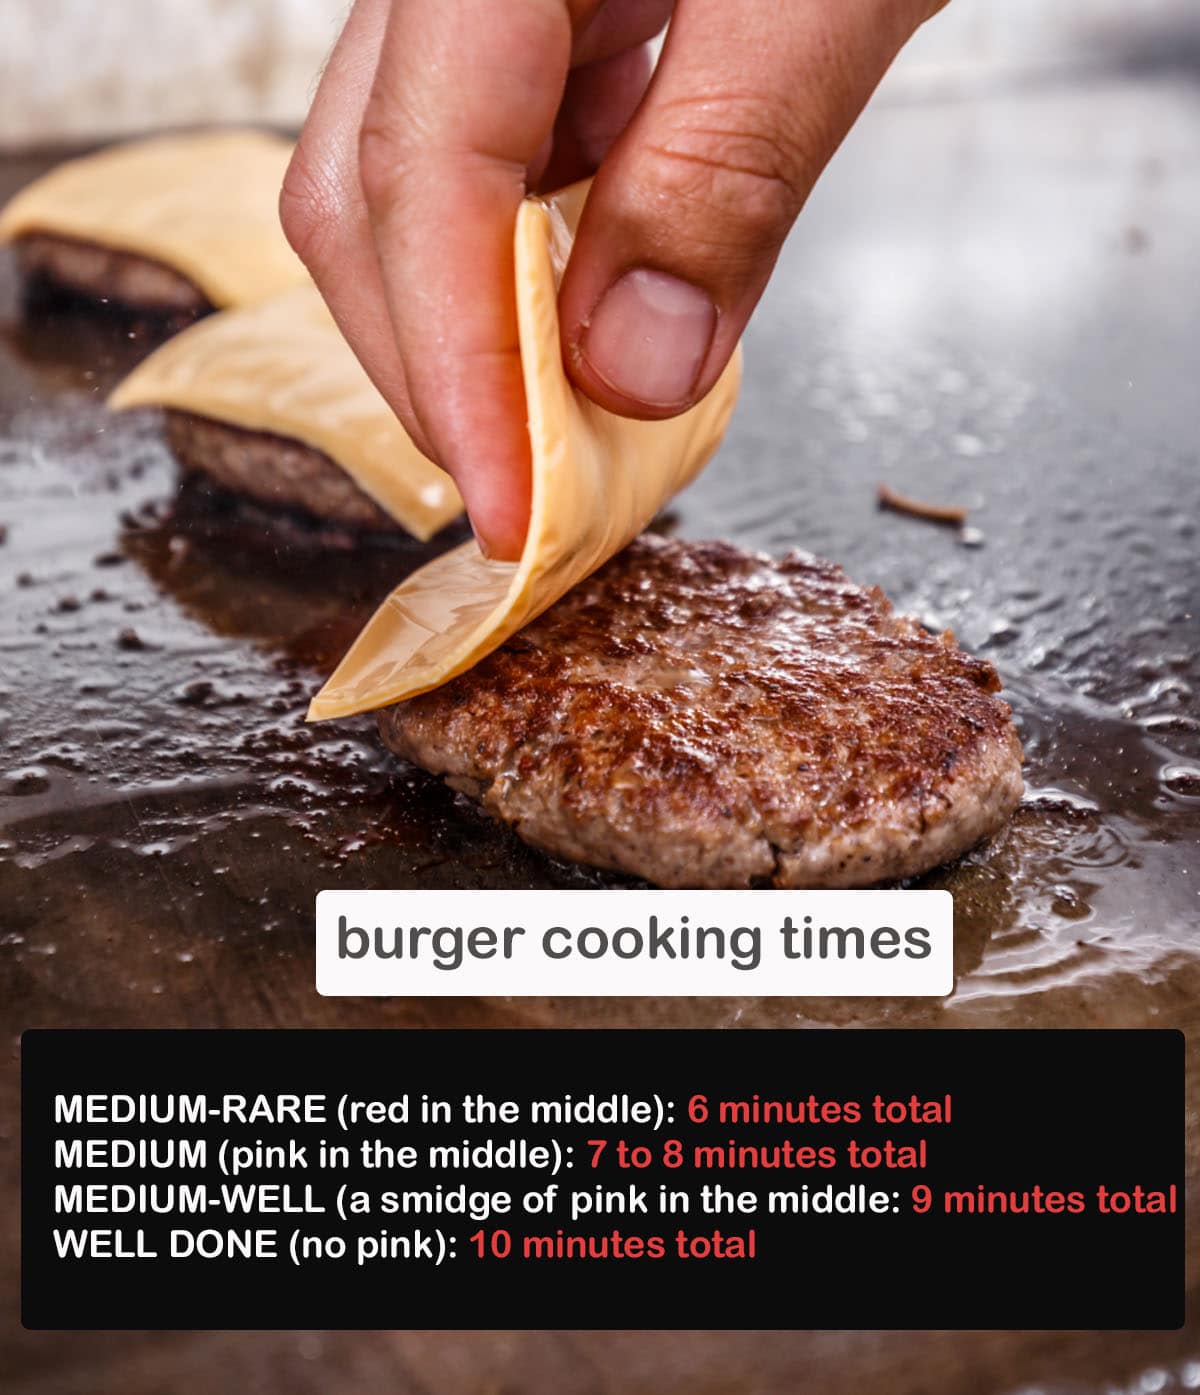 To grill your burger to your perfect preference, follow these suggested times.